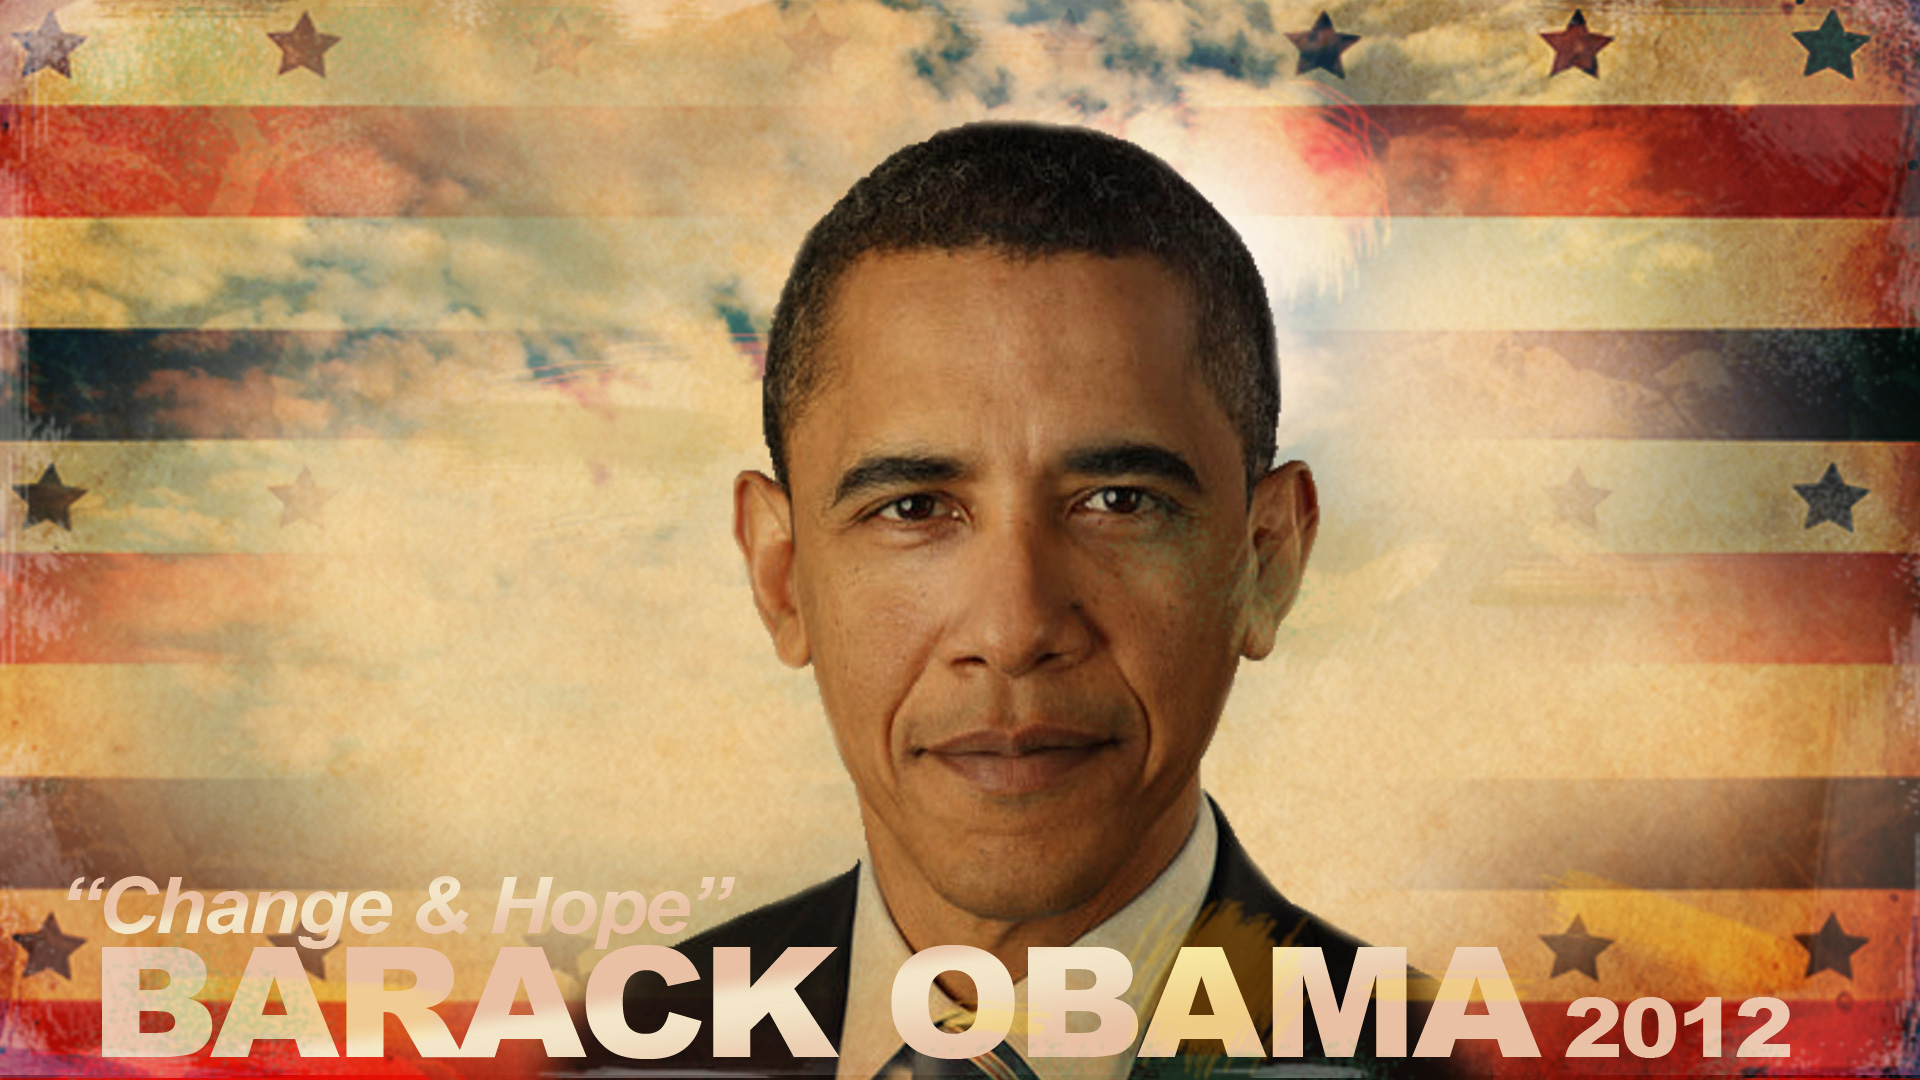 Top Rated Quality HD Barack Obama Image Awesome Collection